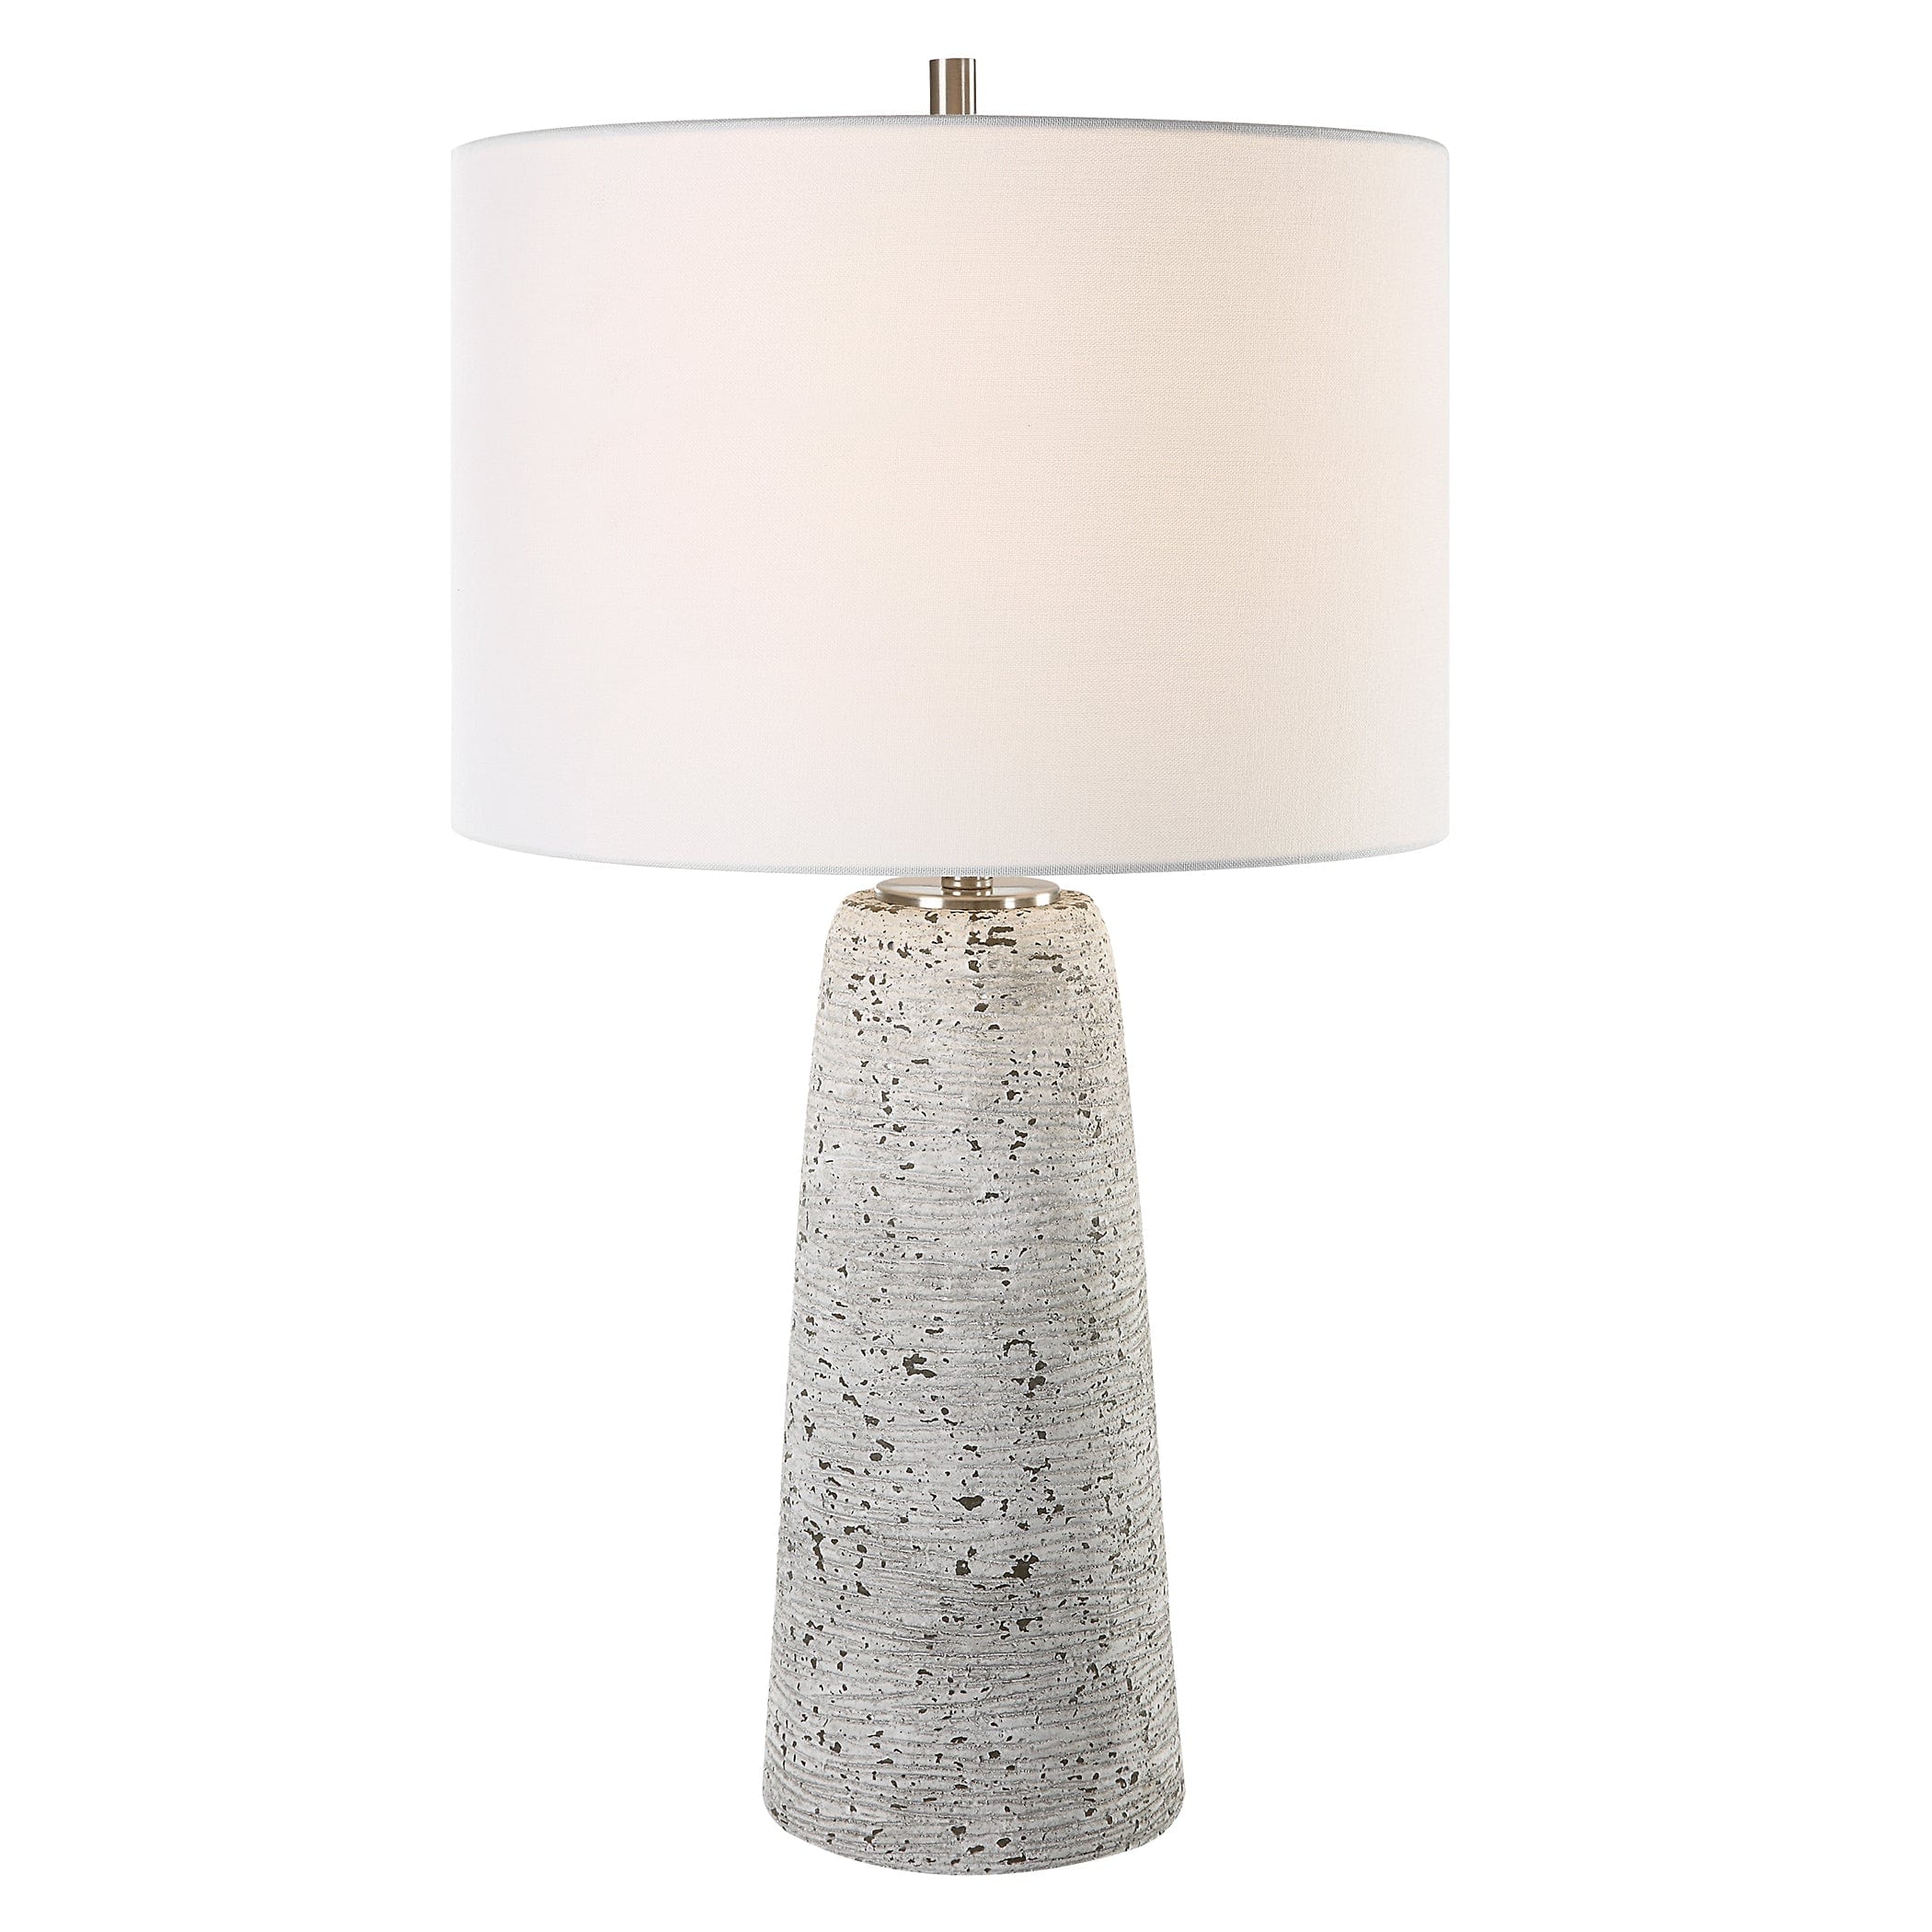 TABLE LAMP-W26127-1 Uttermost